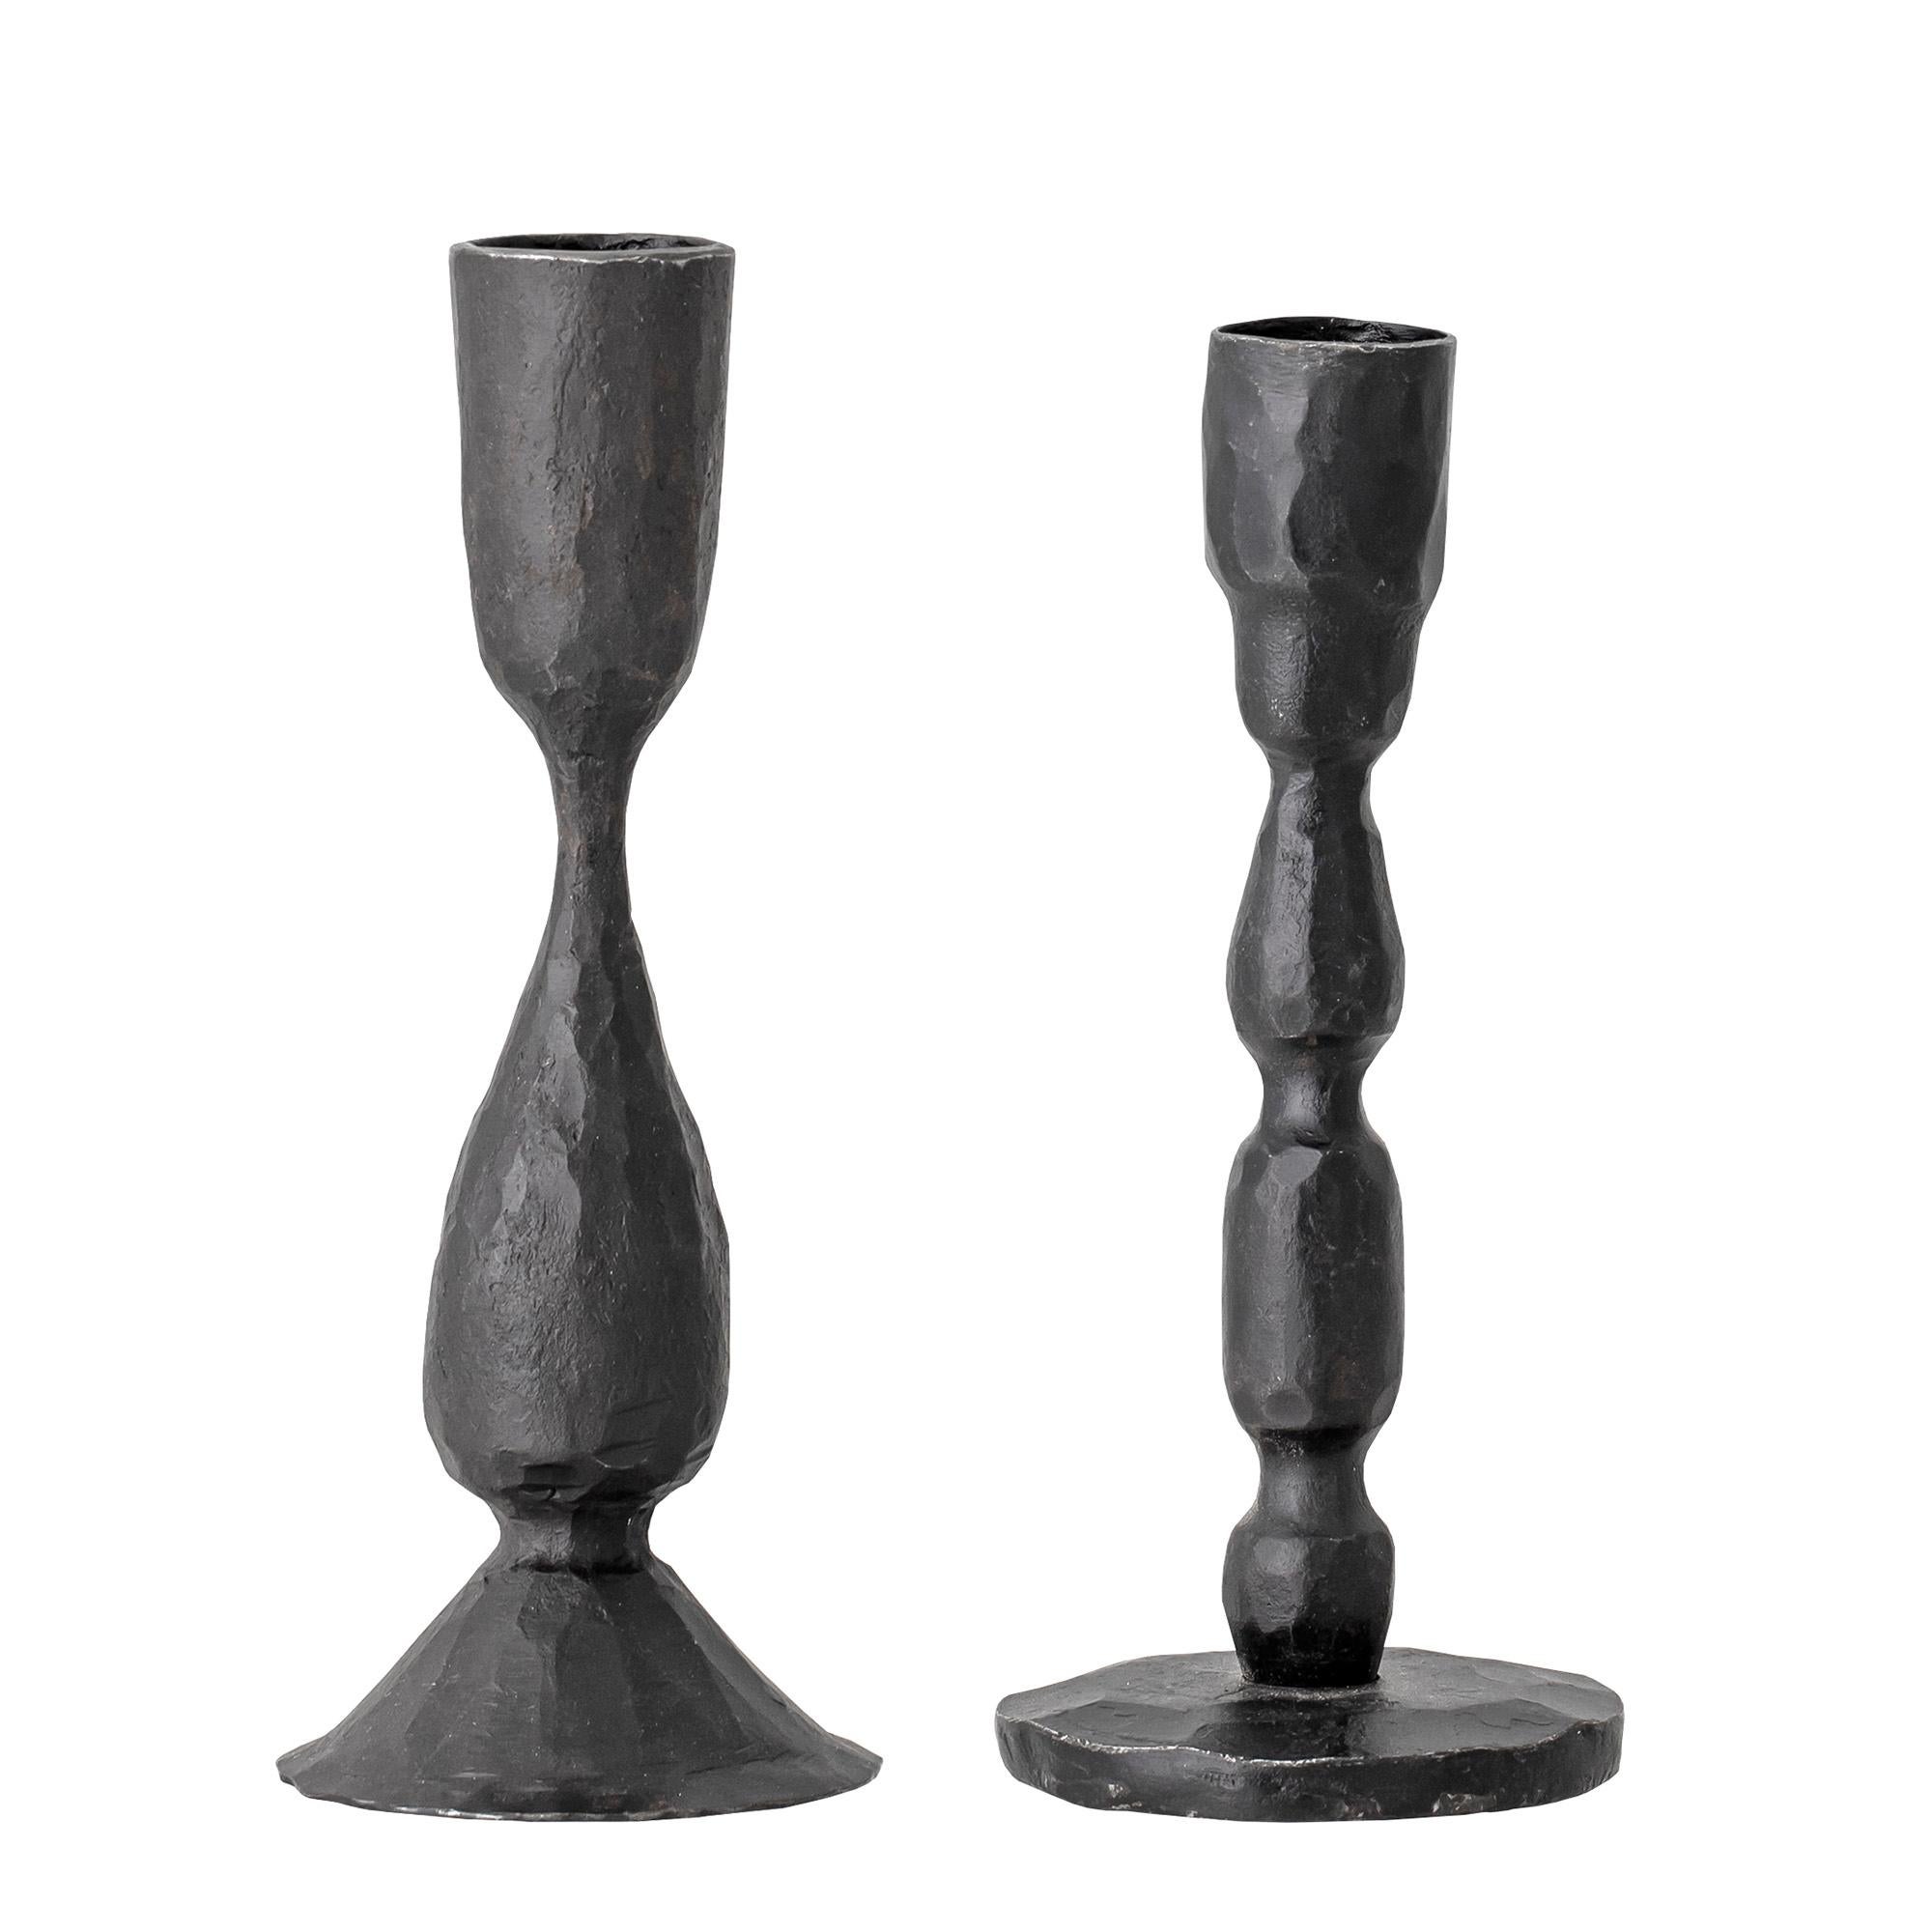 Black cast metal candlestick set of two. Handcrafted, finish values will slightly vary.